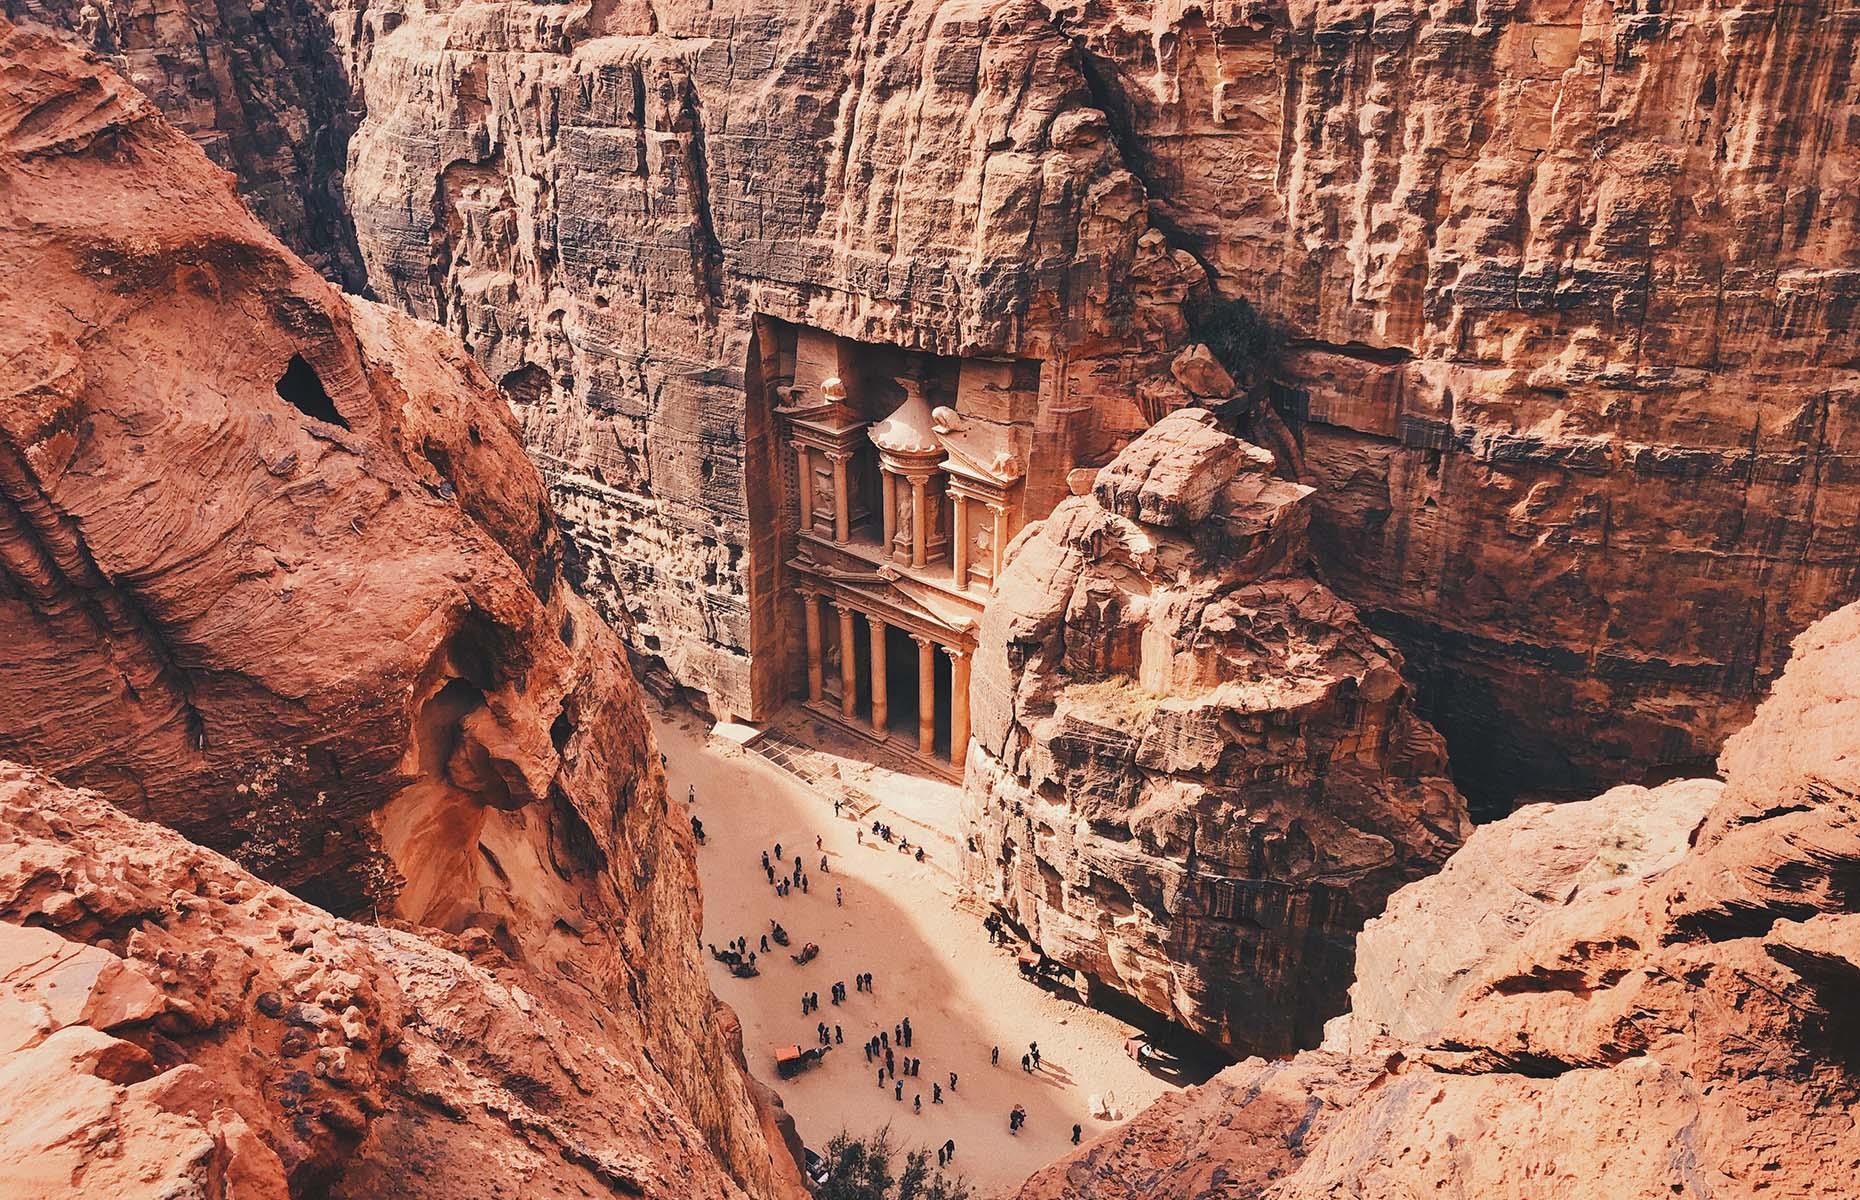 <p>The startling beauty of the ancient hand-hewn sandstone city of Petra cannot be overestimated. Established in 213 BC, it was once the capital city of the Arab Nabateans who were famed for their skill at carving buildings into rocks. Despite now being firmly on the tourist trail, this age-old wonder remains astonishing.</p>  <p><a href="https://www.loveexploring.com/galleries/65646/explore-an-ancient-city-early-civilisations-you-can-see-today?page=1"><strong>Check out more of the world's most beautiful ancient ruined cities</strong></a></p>